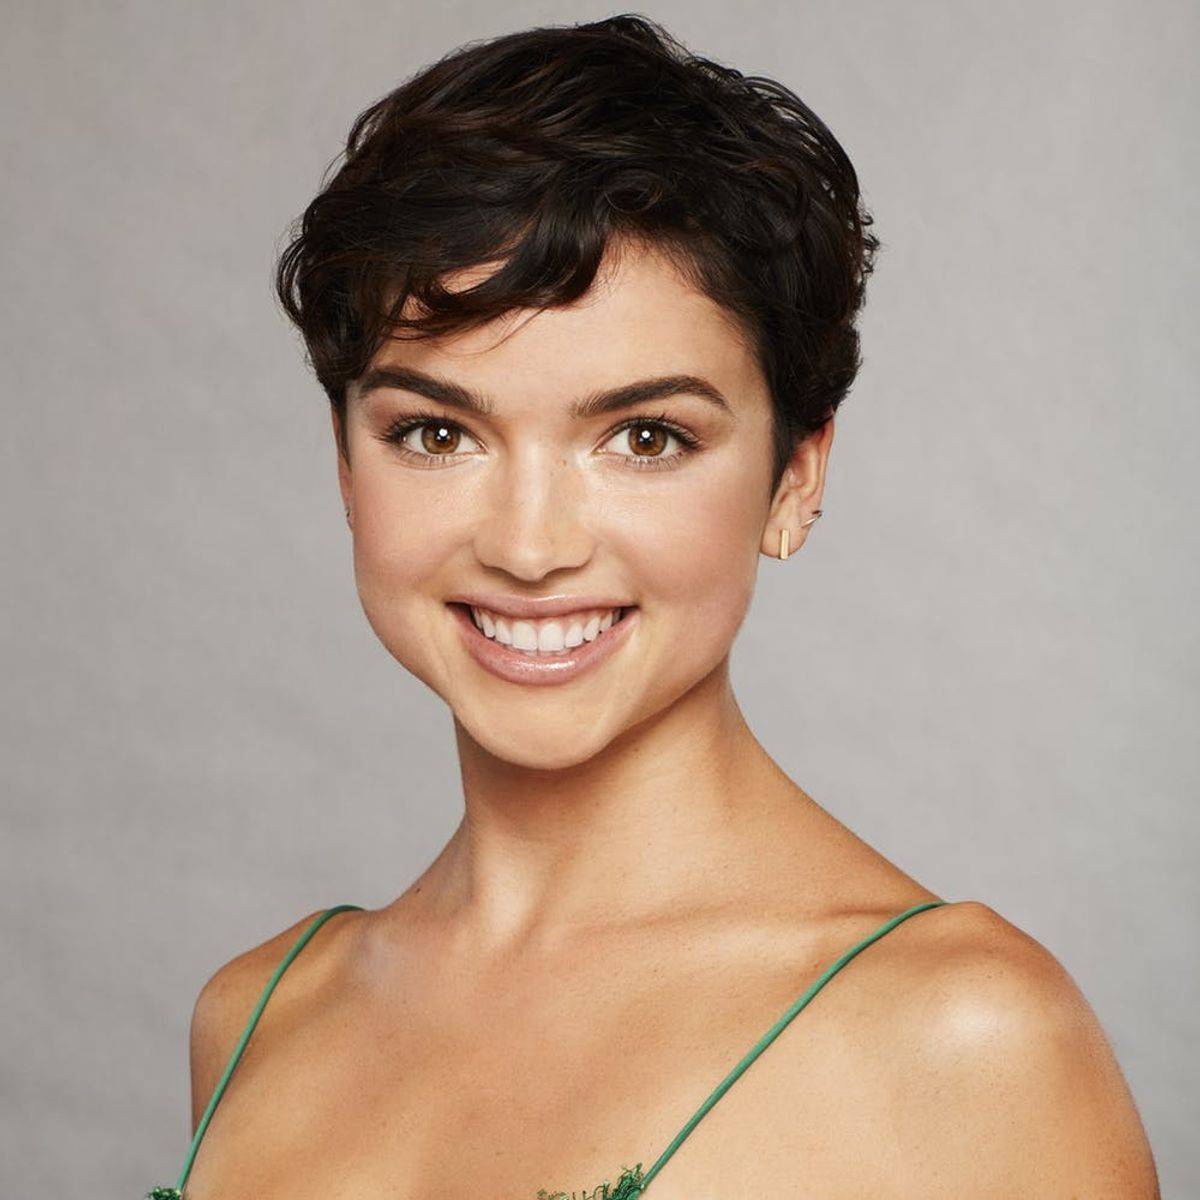 ‘Bachelor’ Contestant Bekah Martinez’s Mom Reported Her Missing While She Was Filming the Show